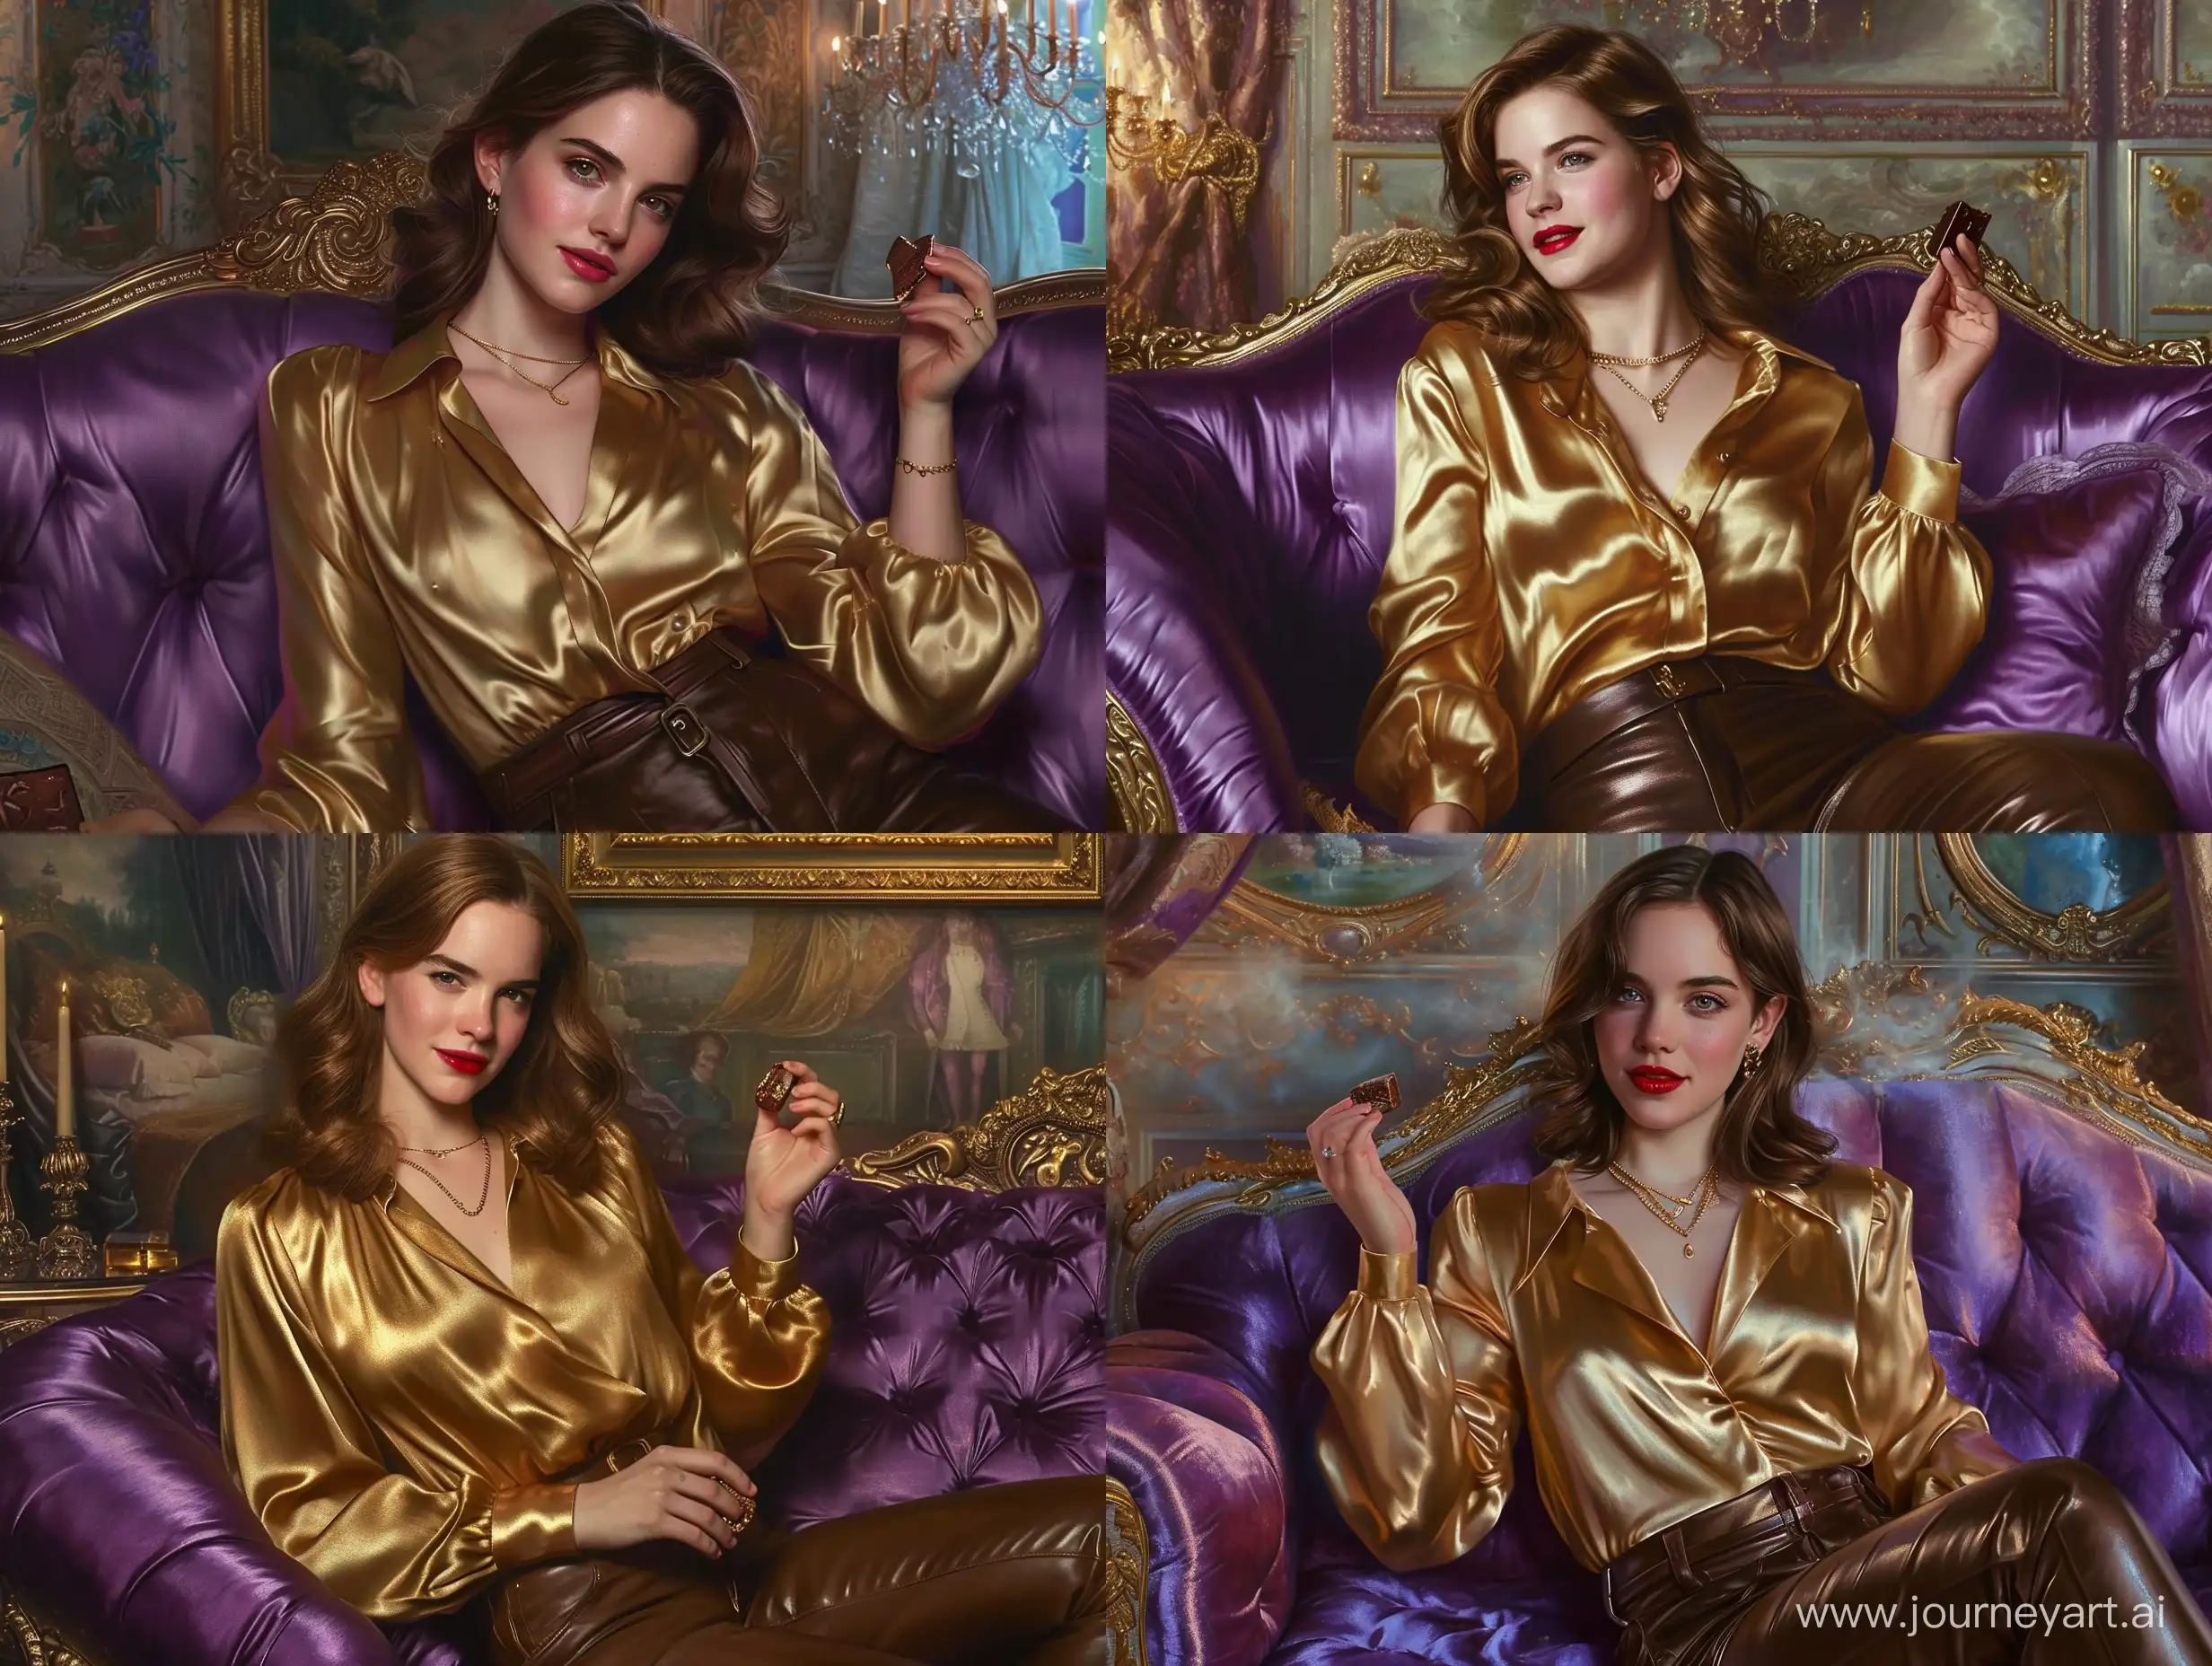 A vision of delightful and happy Emma Watson, with her pretty  hair, shiny red lips, holds a small bit of chocolate in her right hand. She lounges on a luxurious purple plush couch in a lavish bedroom, dressed in a stunning shiny gold satin blouse and sleek brown leather pants. A shining beautiful gold necklace adorns her neck and a sparkling diamond ring adorns her ring finger, adding a touch of elegance to her already stunning appearance.